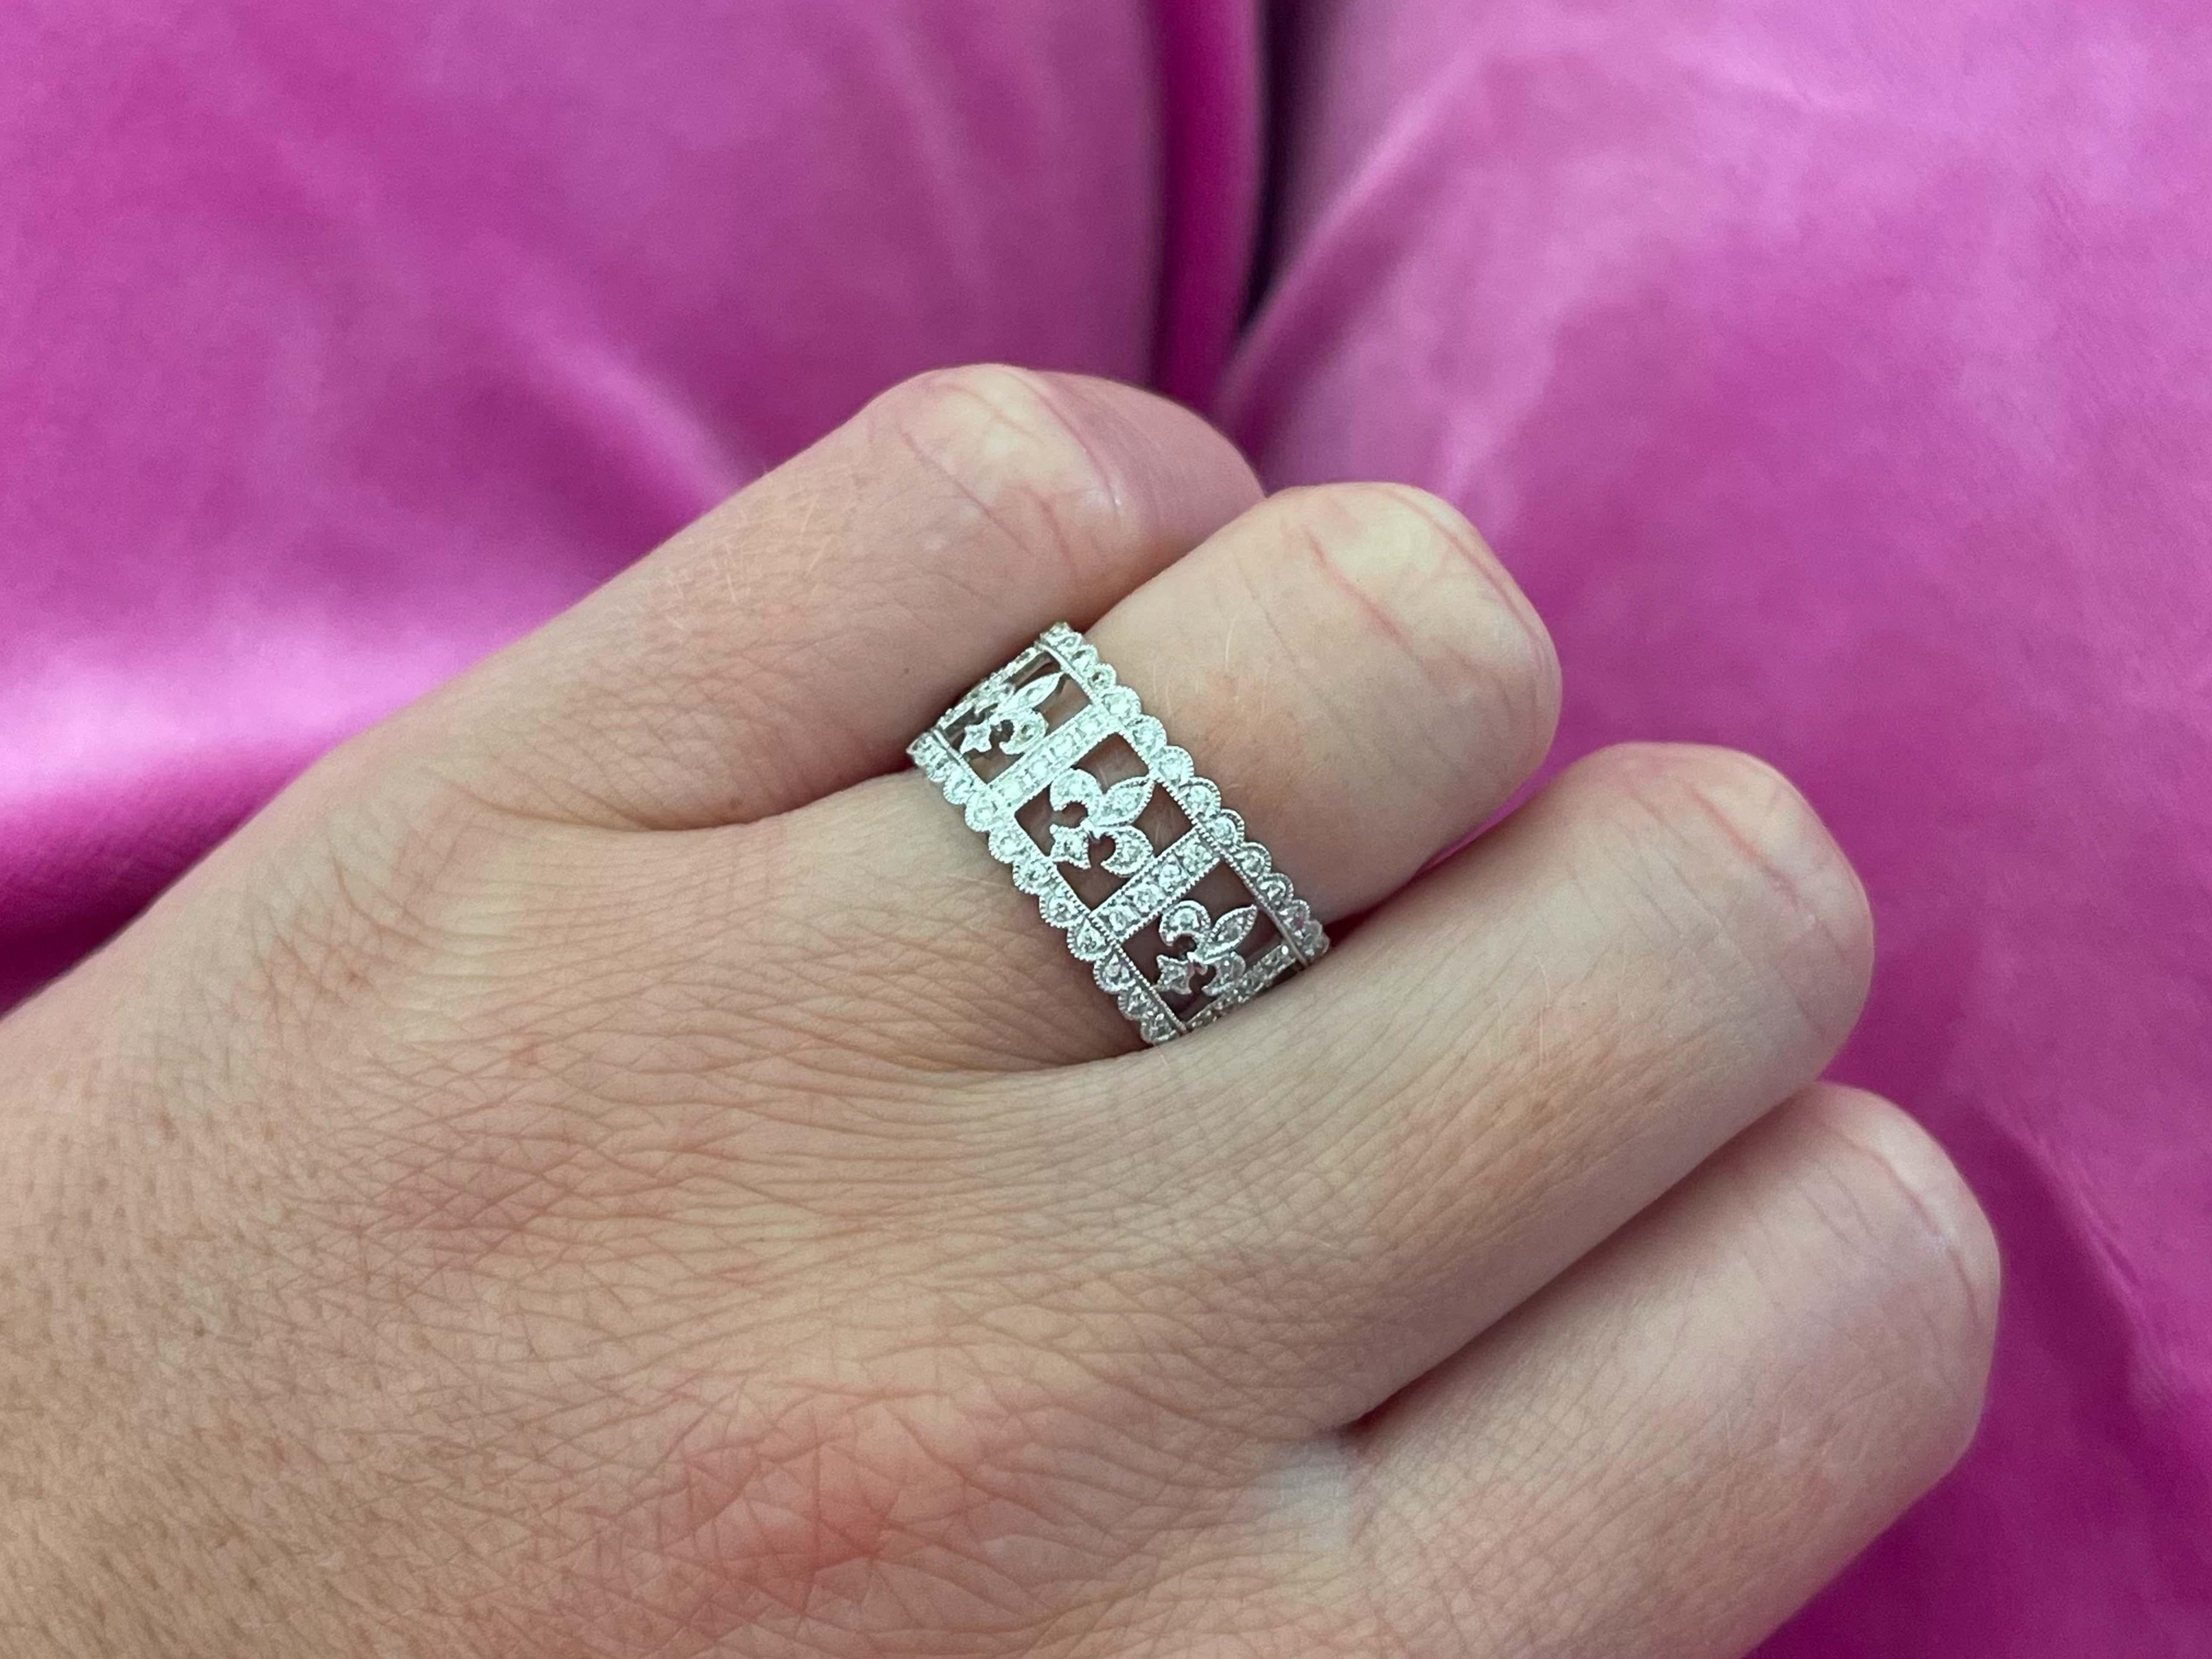 Item Specifications:

Metal: 18k White Gold

Total Diamond Carat Weight: 0.77 carats 

Diamond Color: G-H

Diamond Clarity: VS

Ring Size: 6.5

Total Weight: 5.3 Grams

Stamped: 